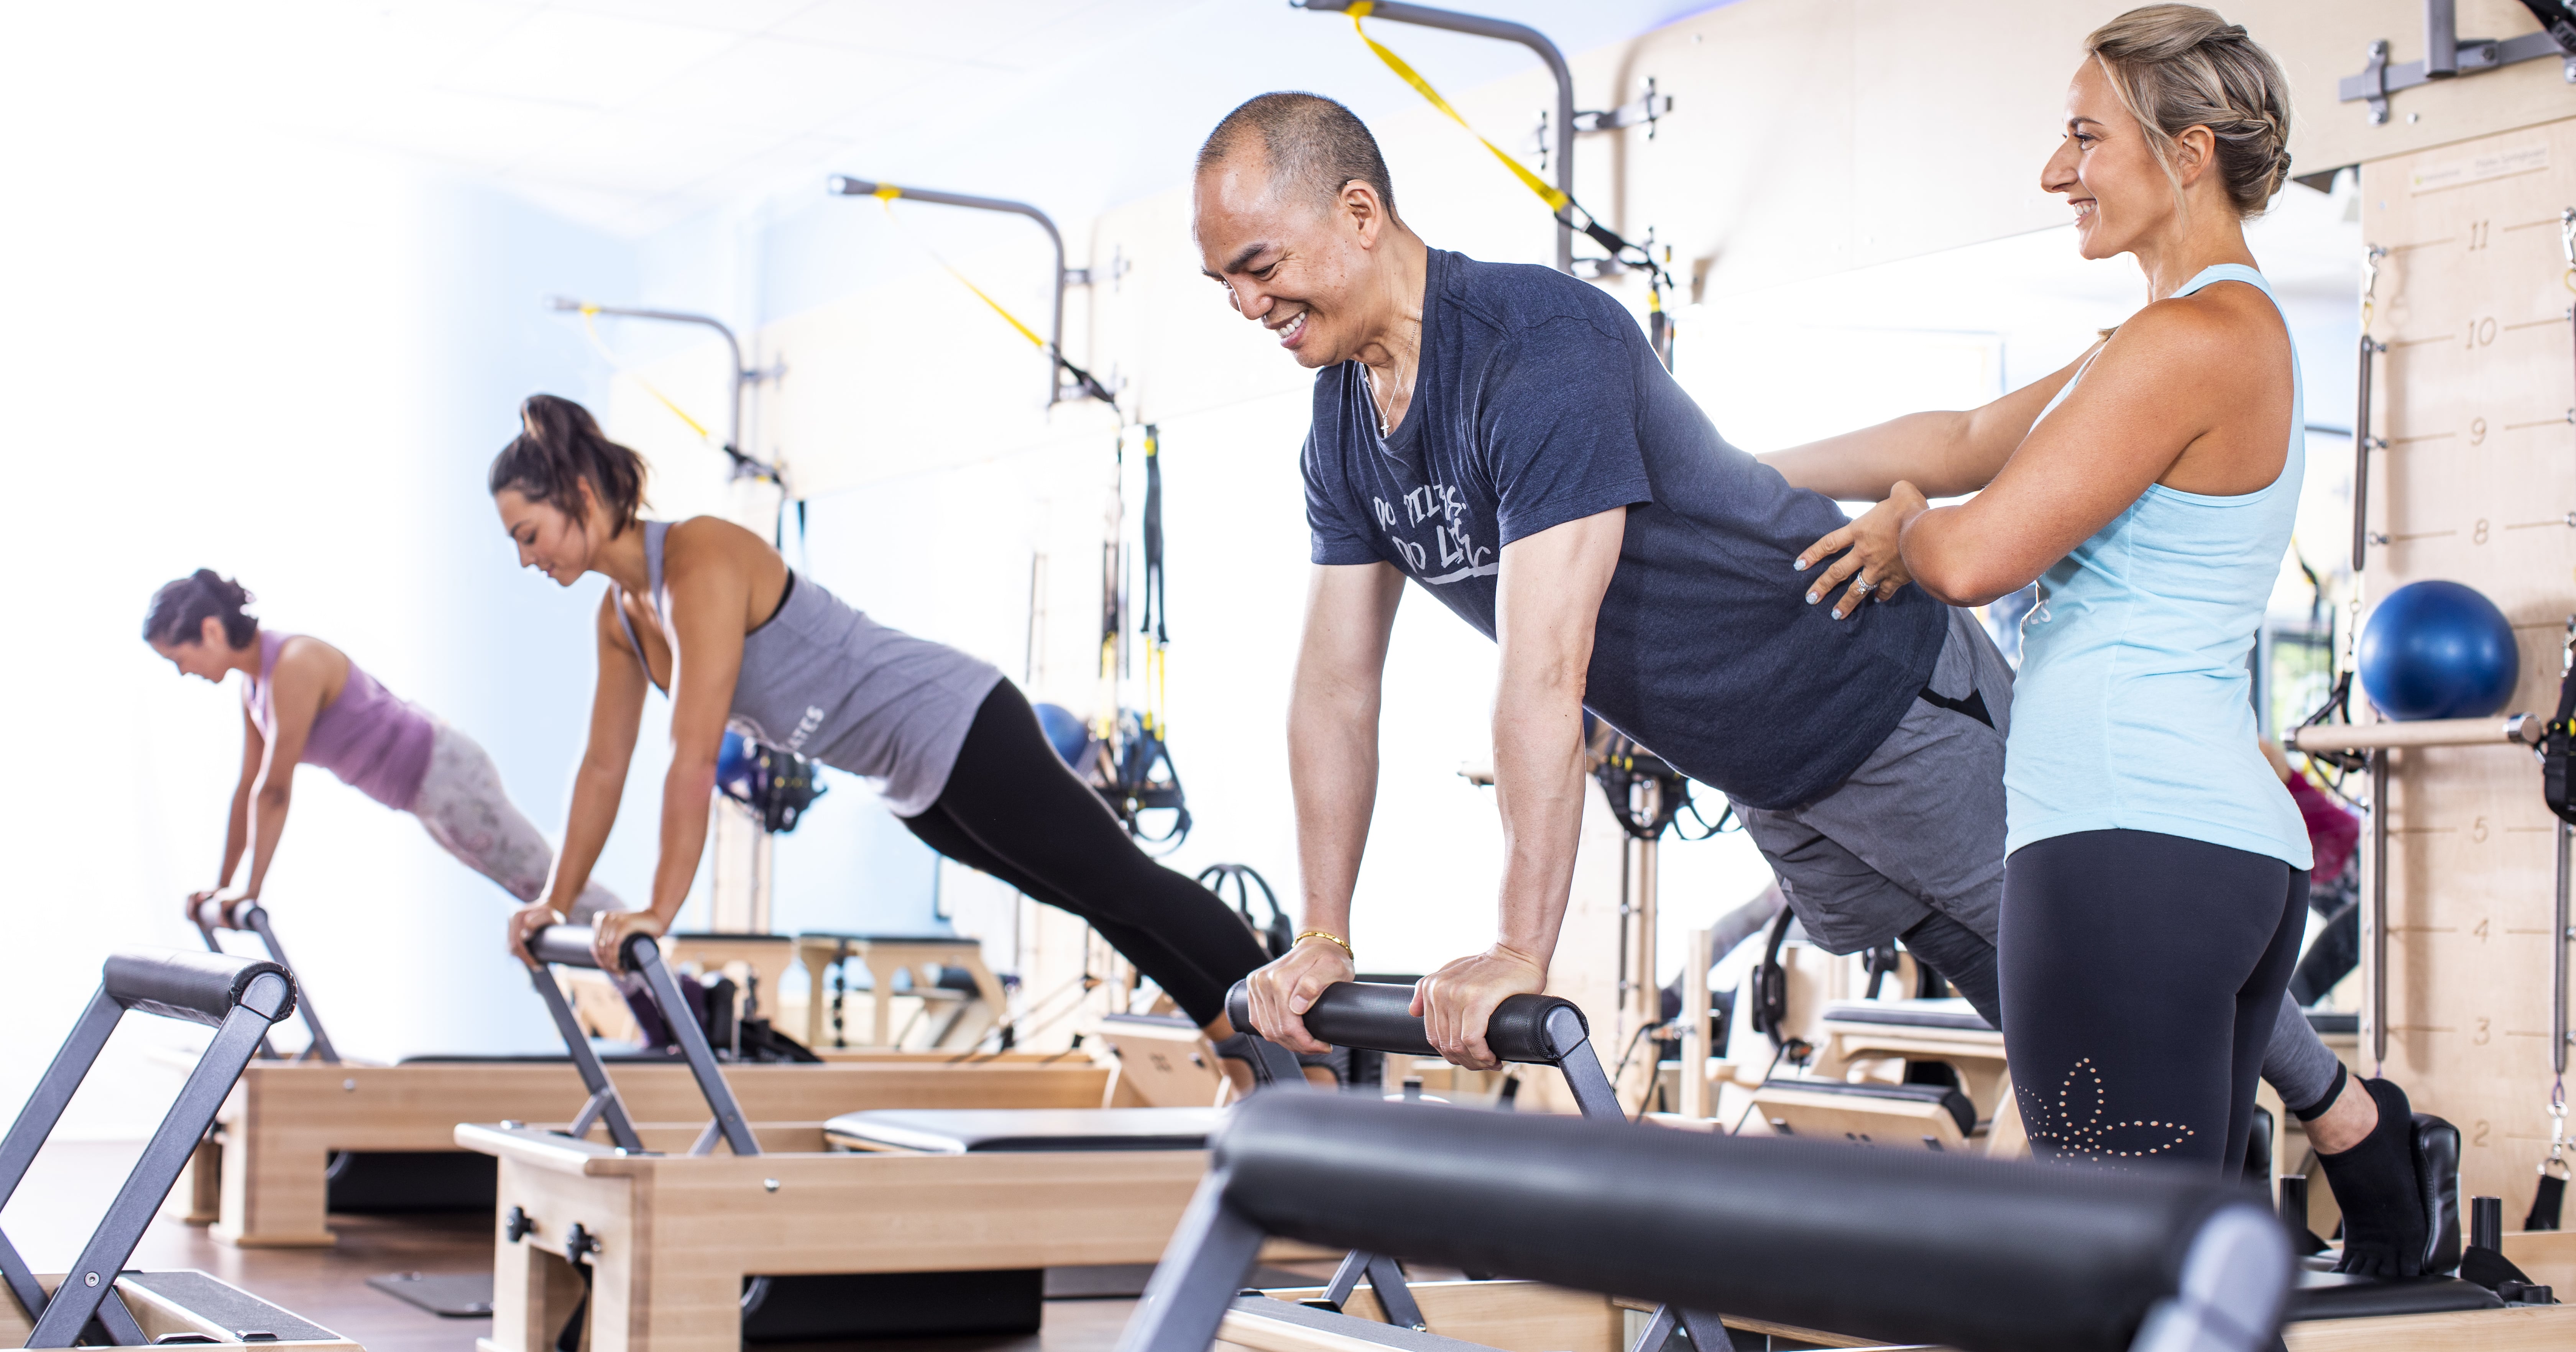 Club Pilates Prices: How Much Does a Membership Cost?